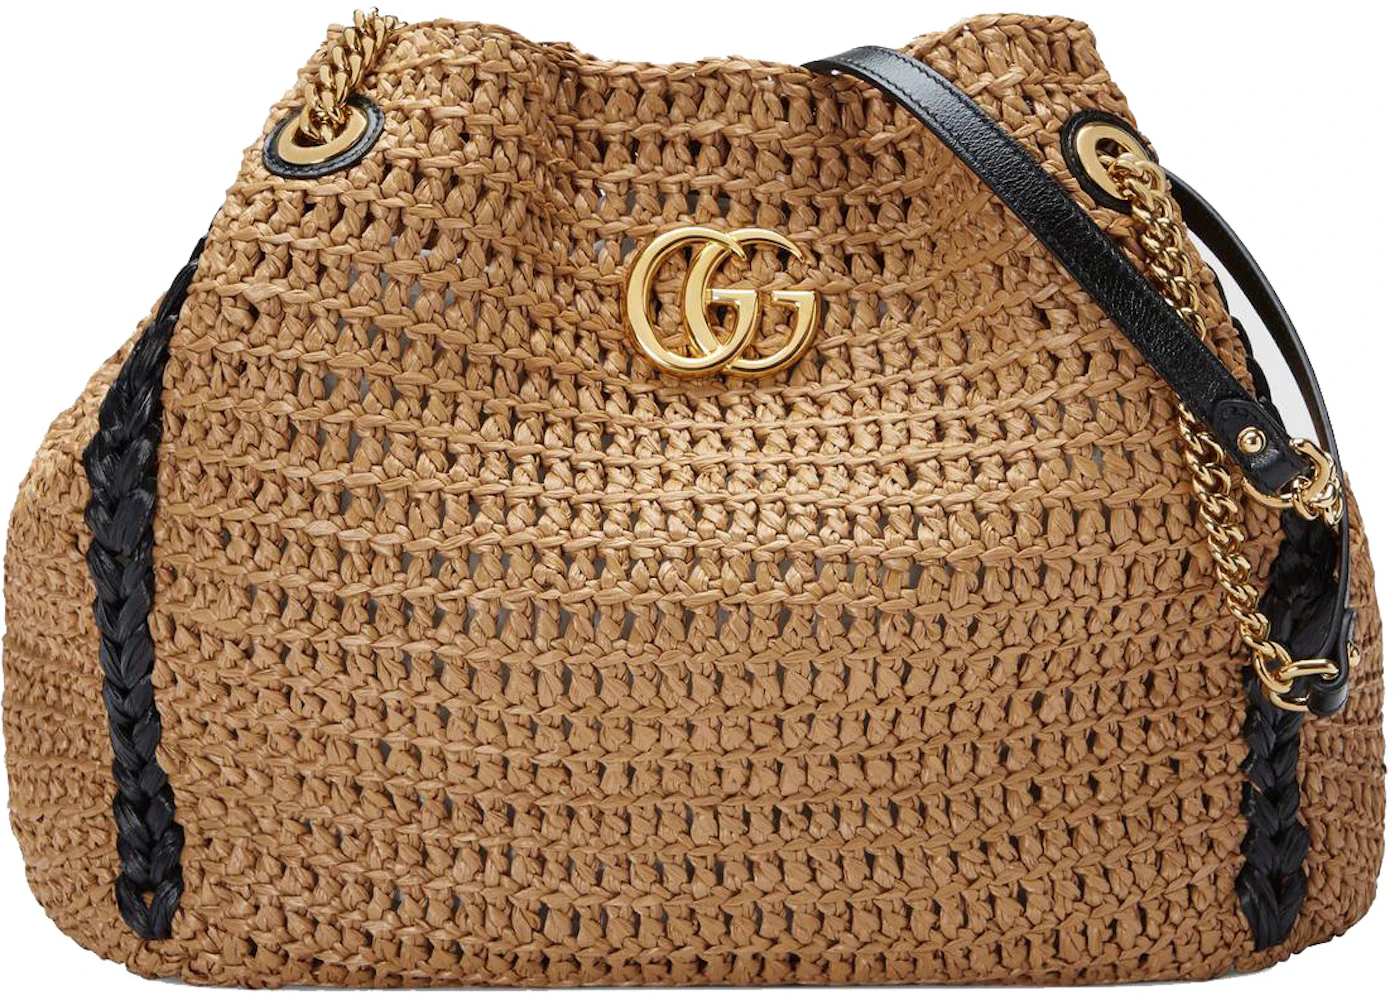 Gucci GG Marmont Tote Large Beige/Black in Raffia with Antique